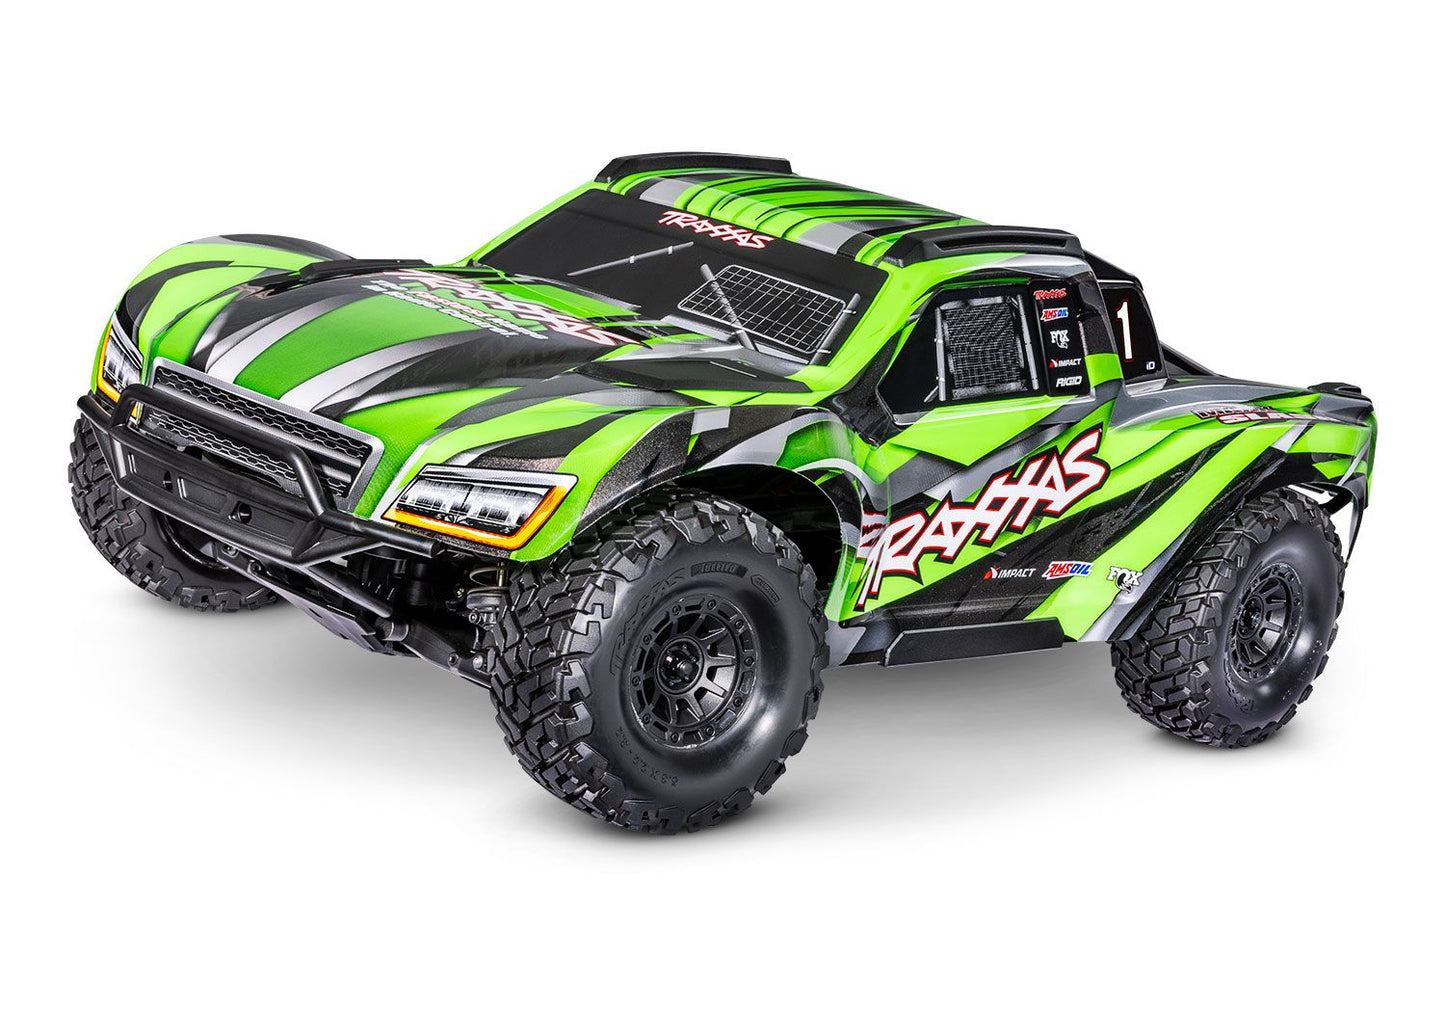 TRAXXAS Blue Maxx® Slash®: 1/10 Scale 4WD Brushless Electric Short Course Racing Truck 102076-4